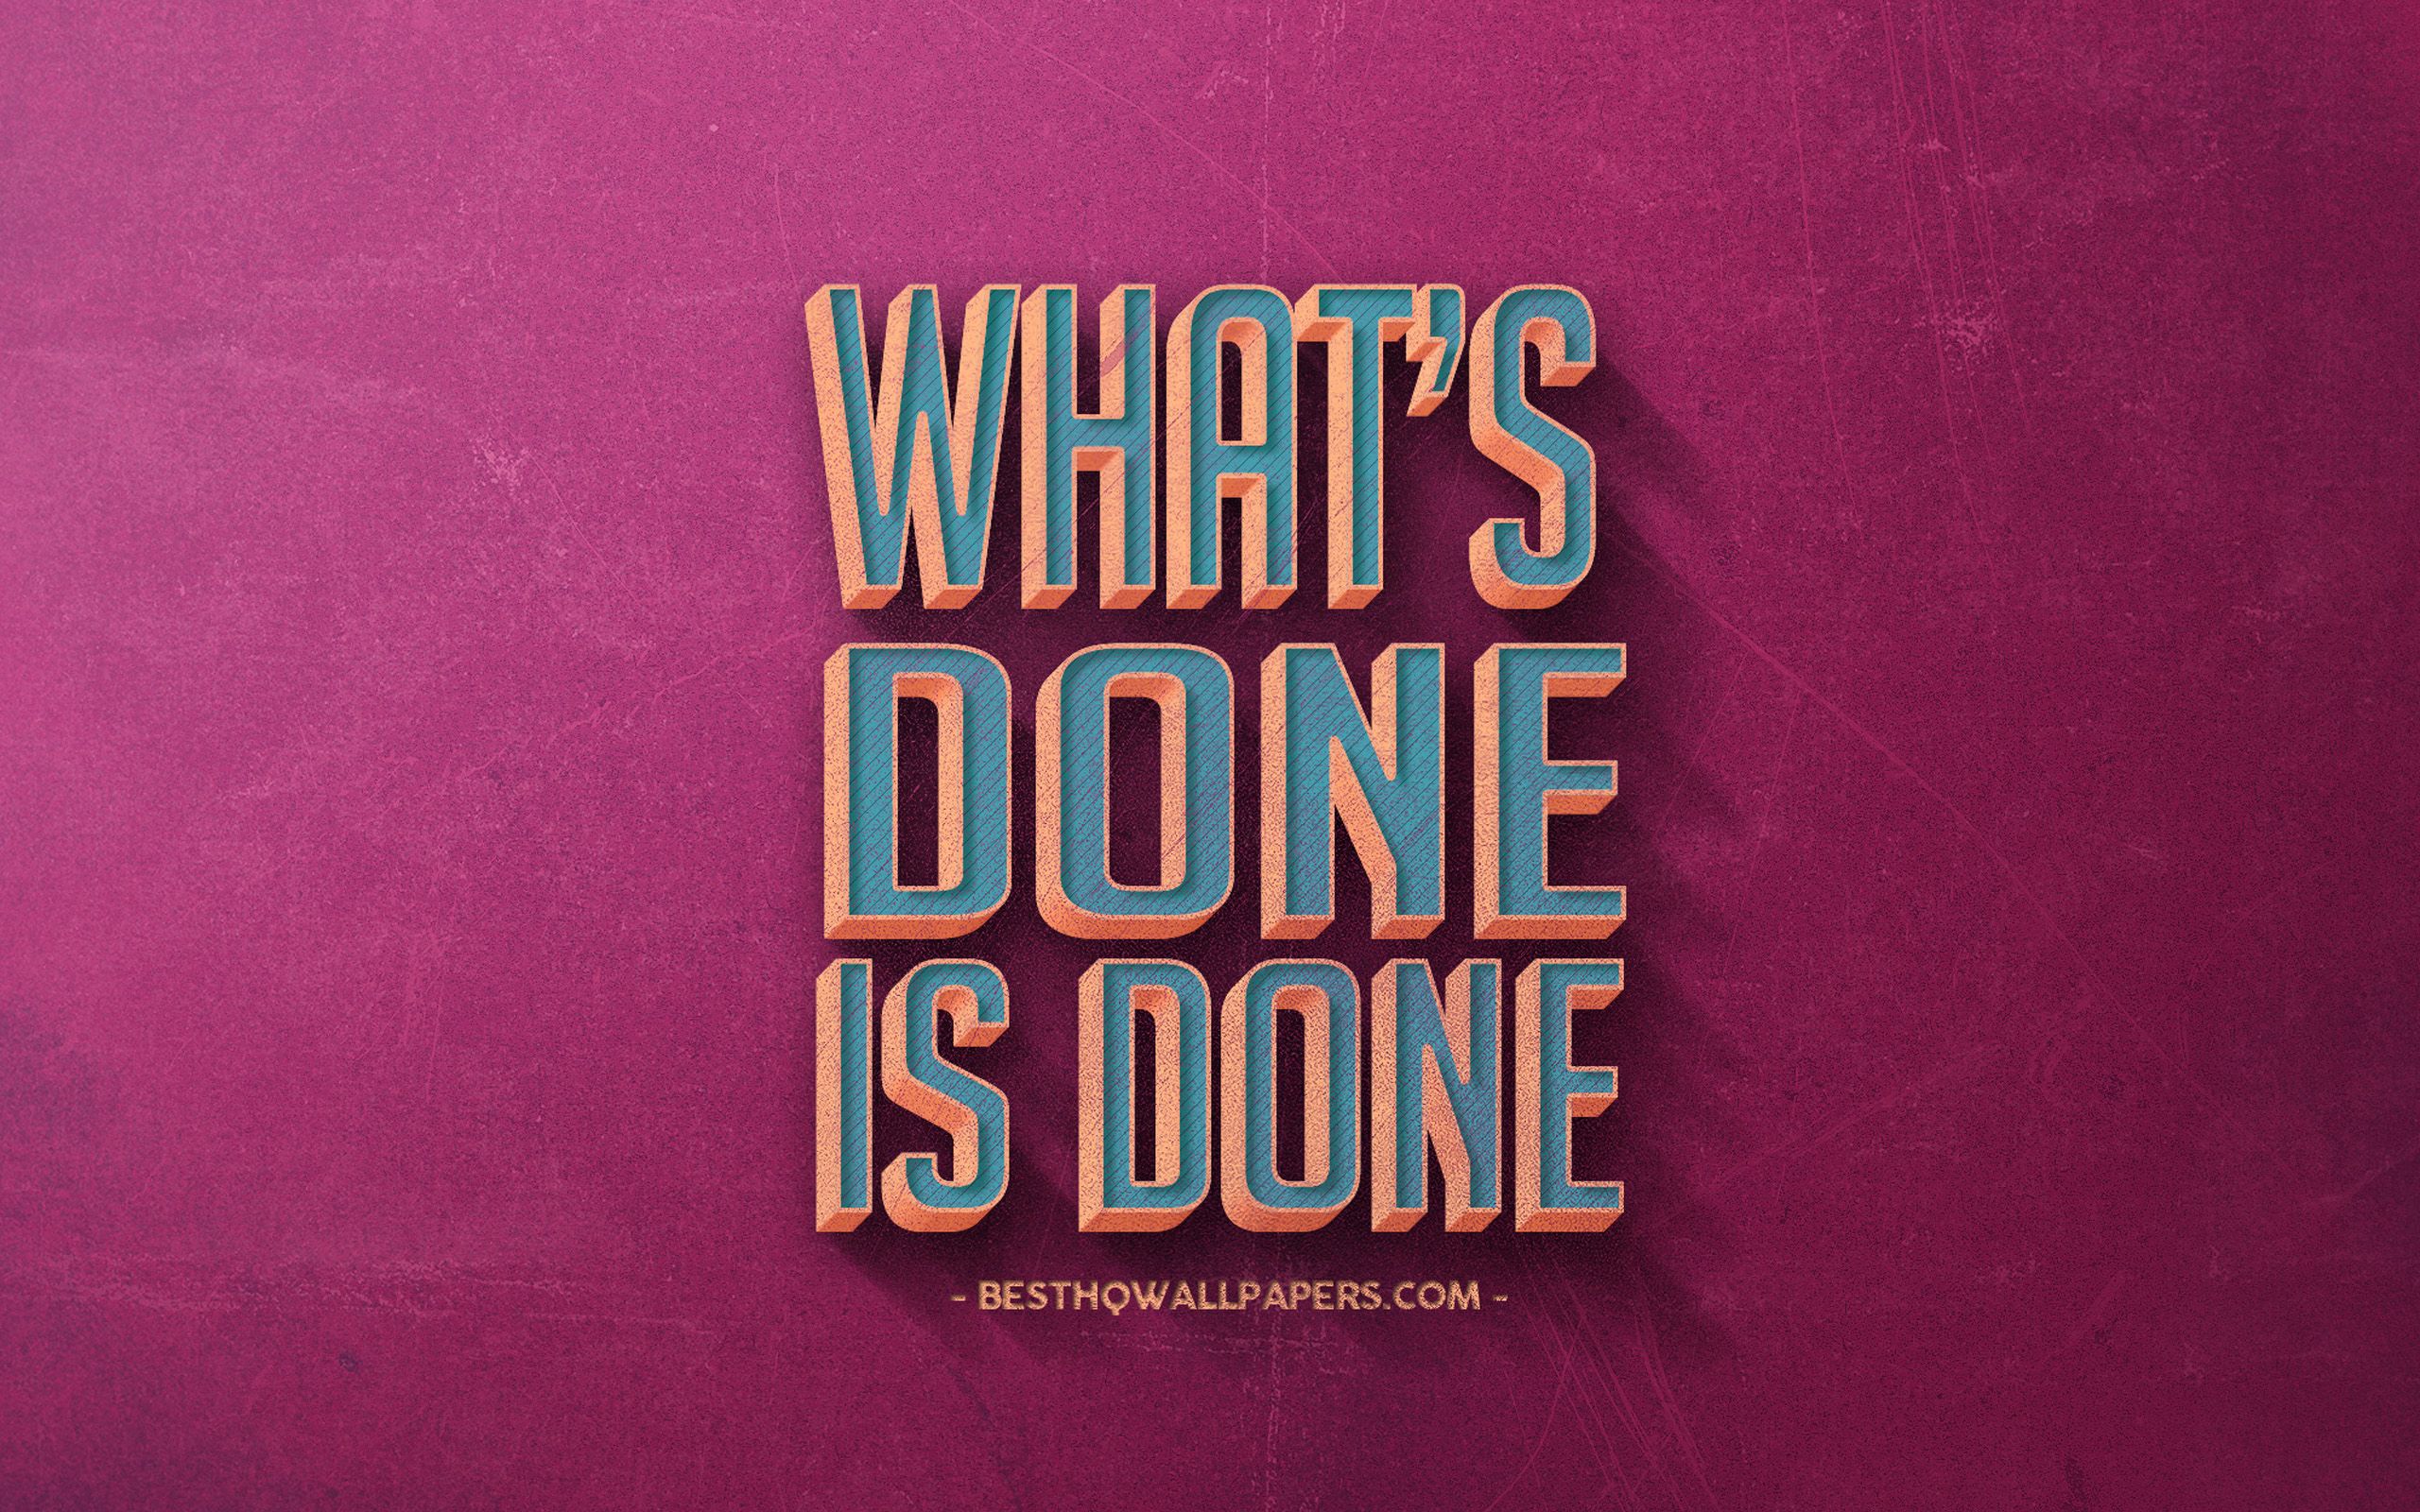 Download wallpaper Whats done is done, popular quotes, short